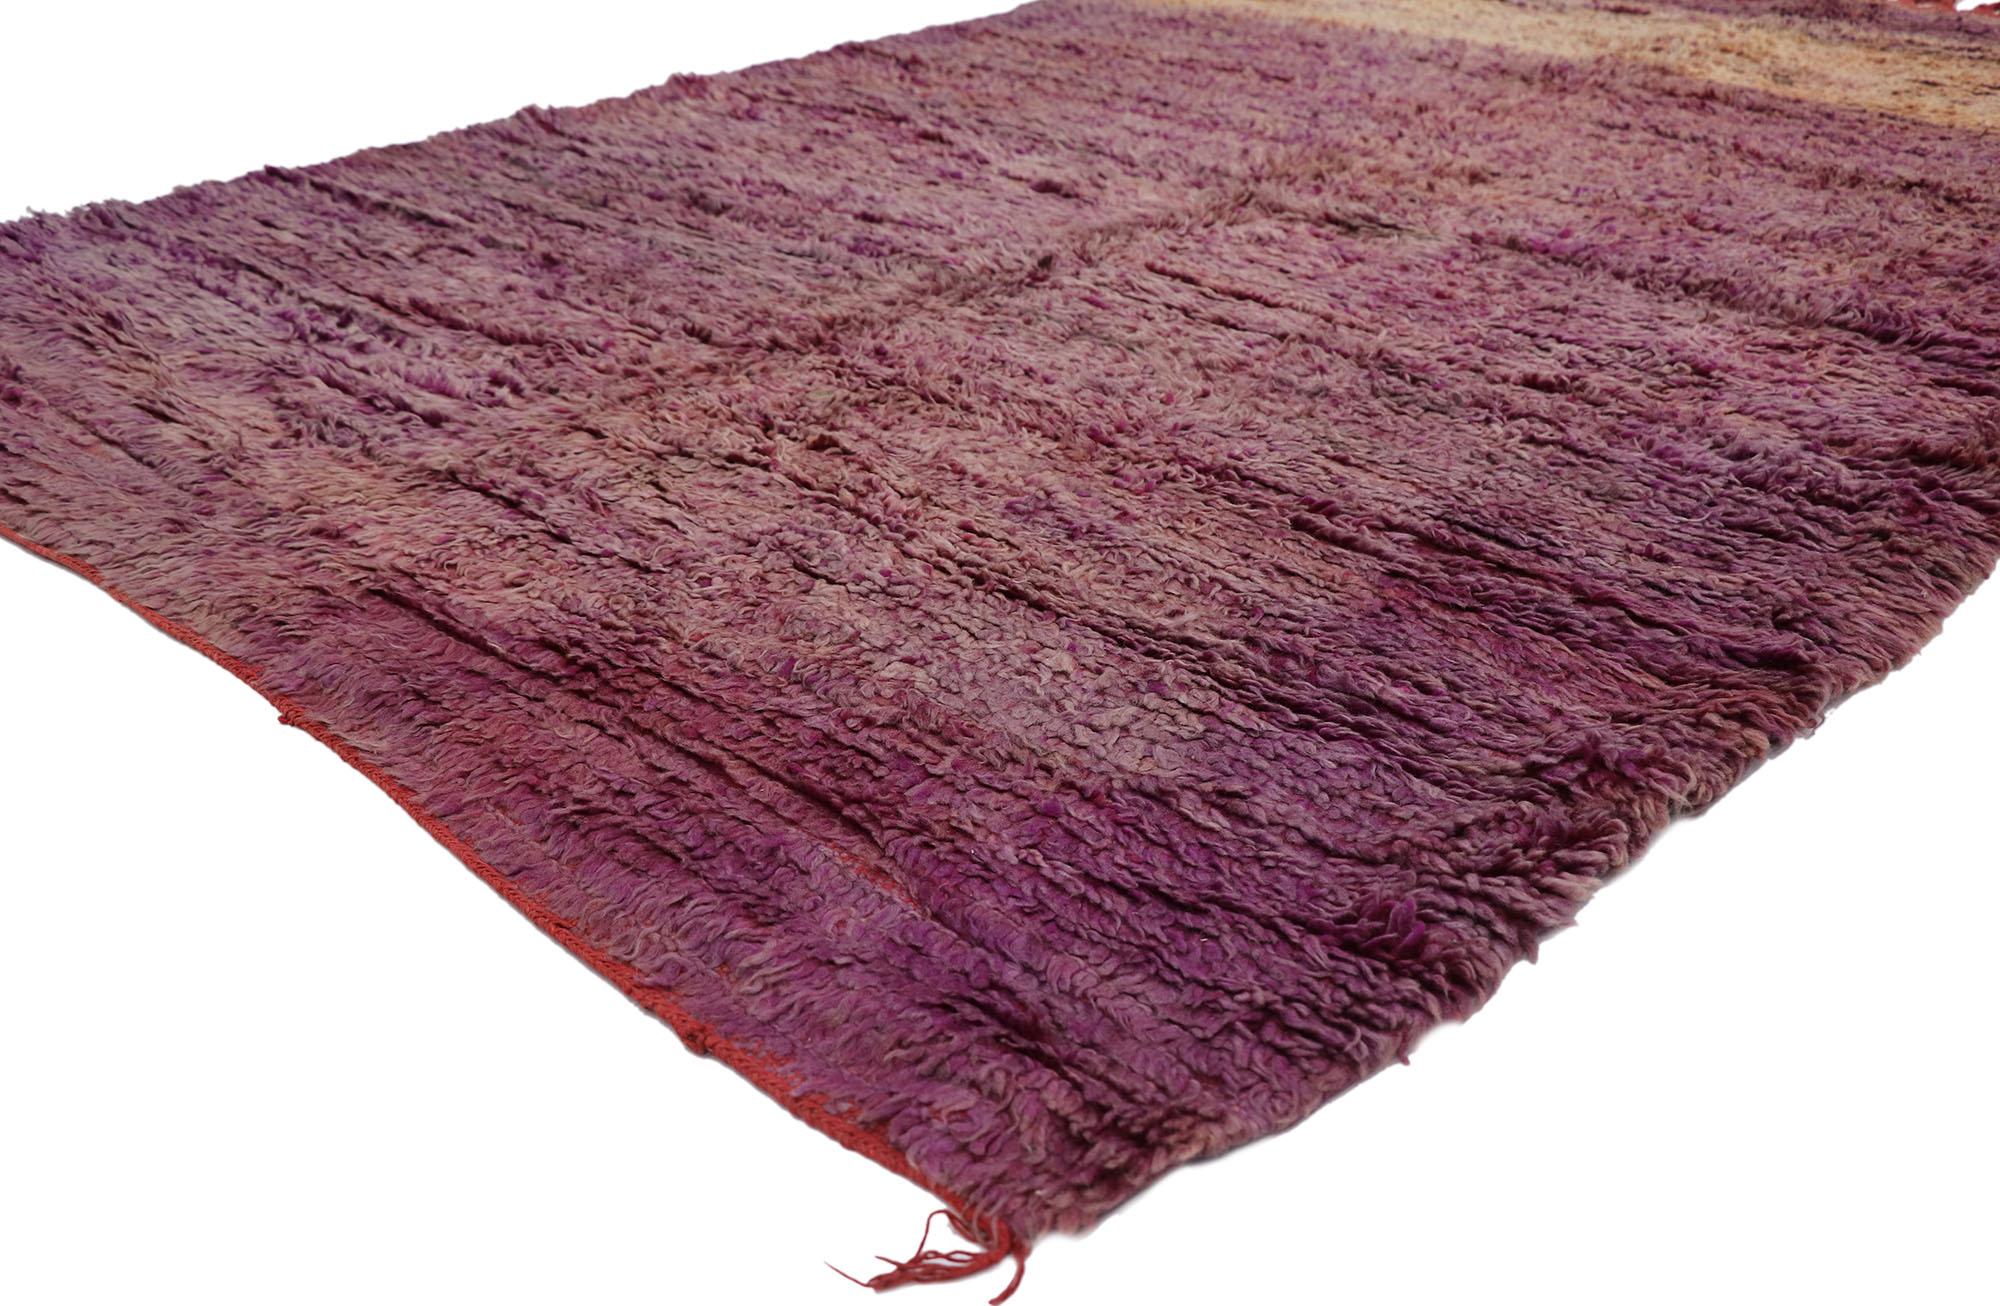 21425 Vintage Beni Mrirt Moroccan Rug, 05'06 x 08'00.
Expressionist style meets simplicity in this hand-knotted wool vintage Beni Mrirt Moroccan rug. Imbued with rust and purple hues, the rich waves of abrash and softly gradated striations run